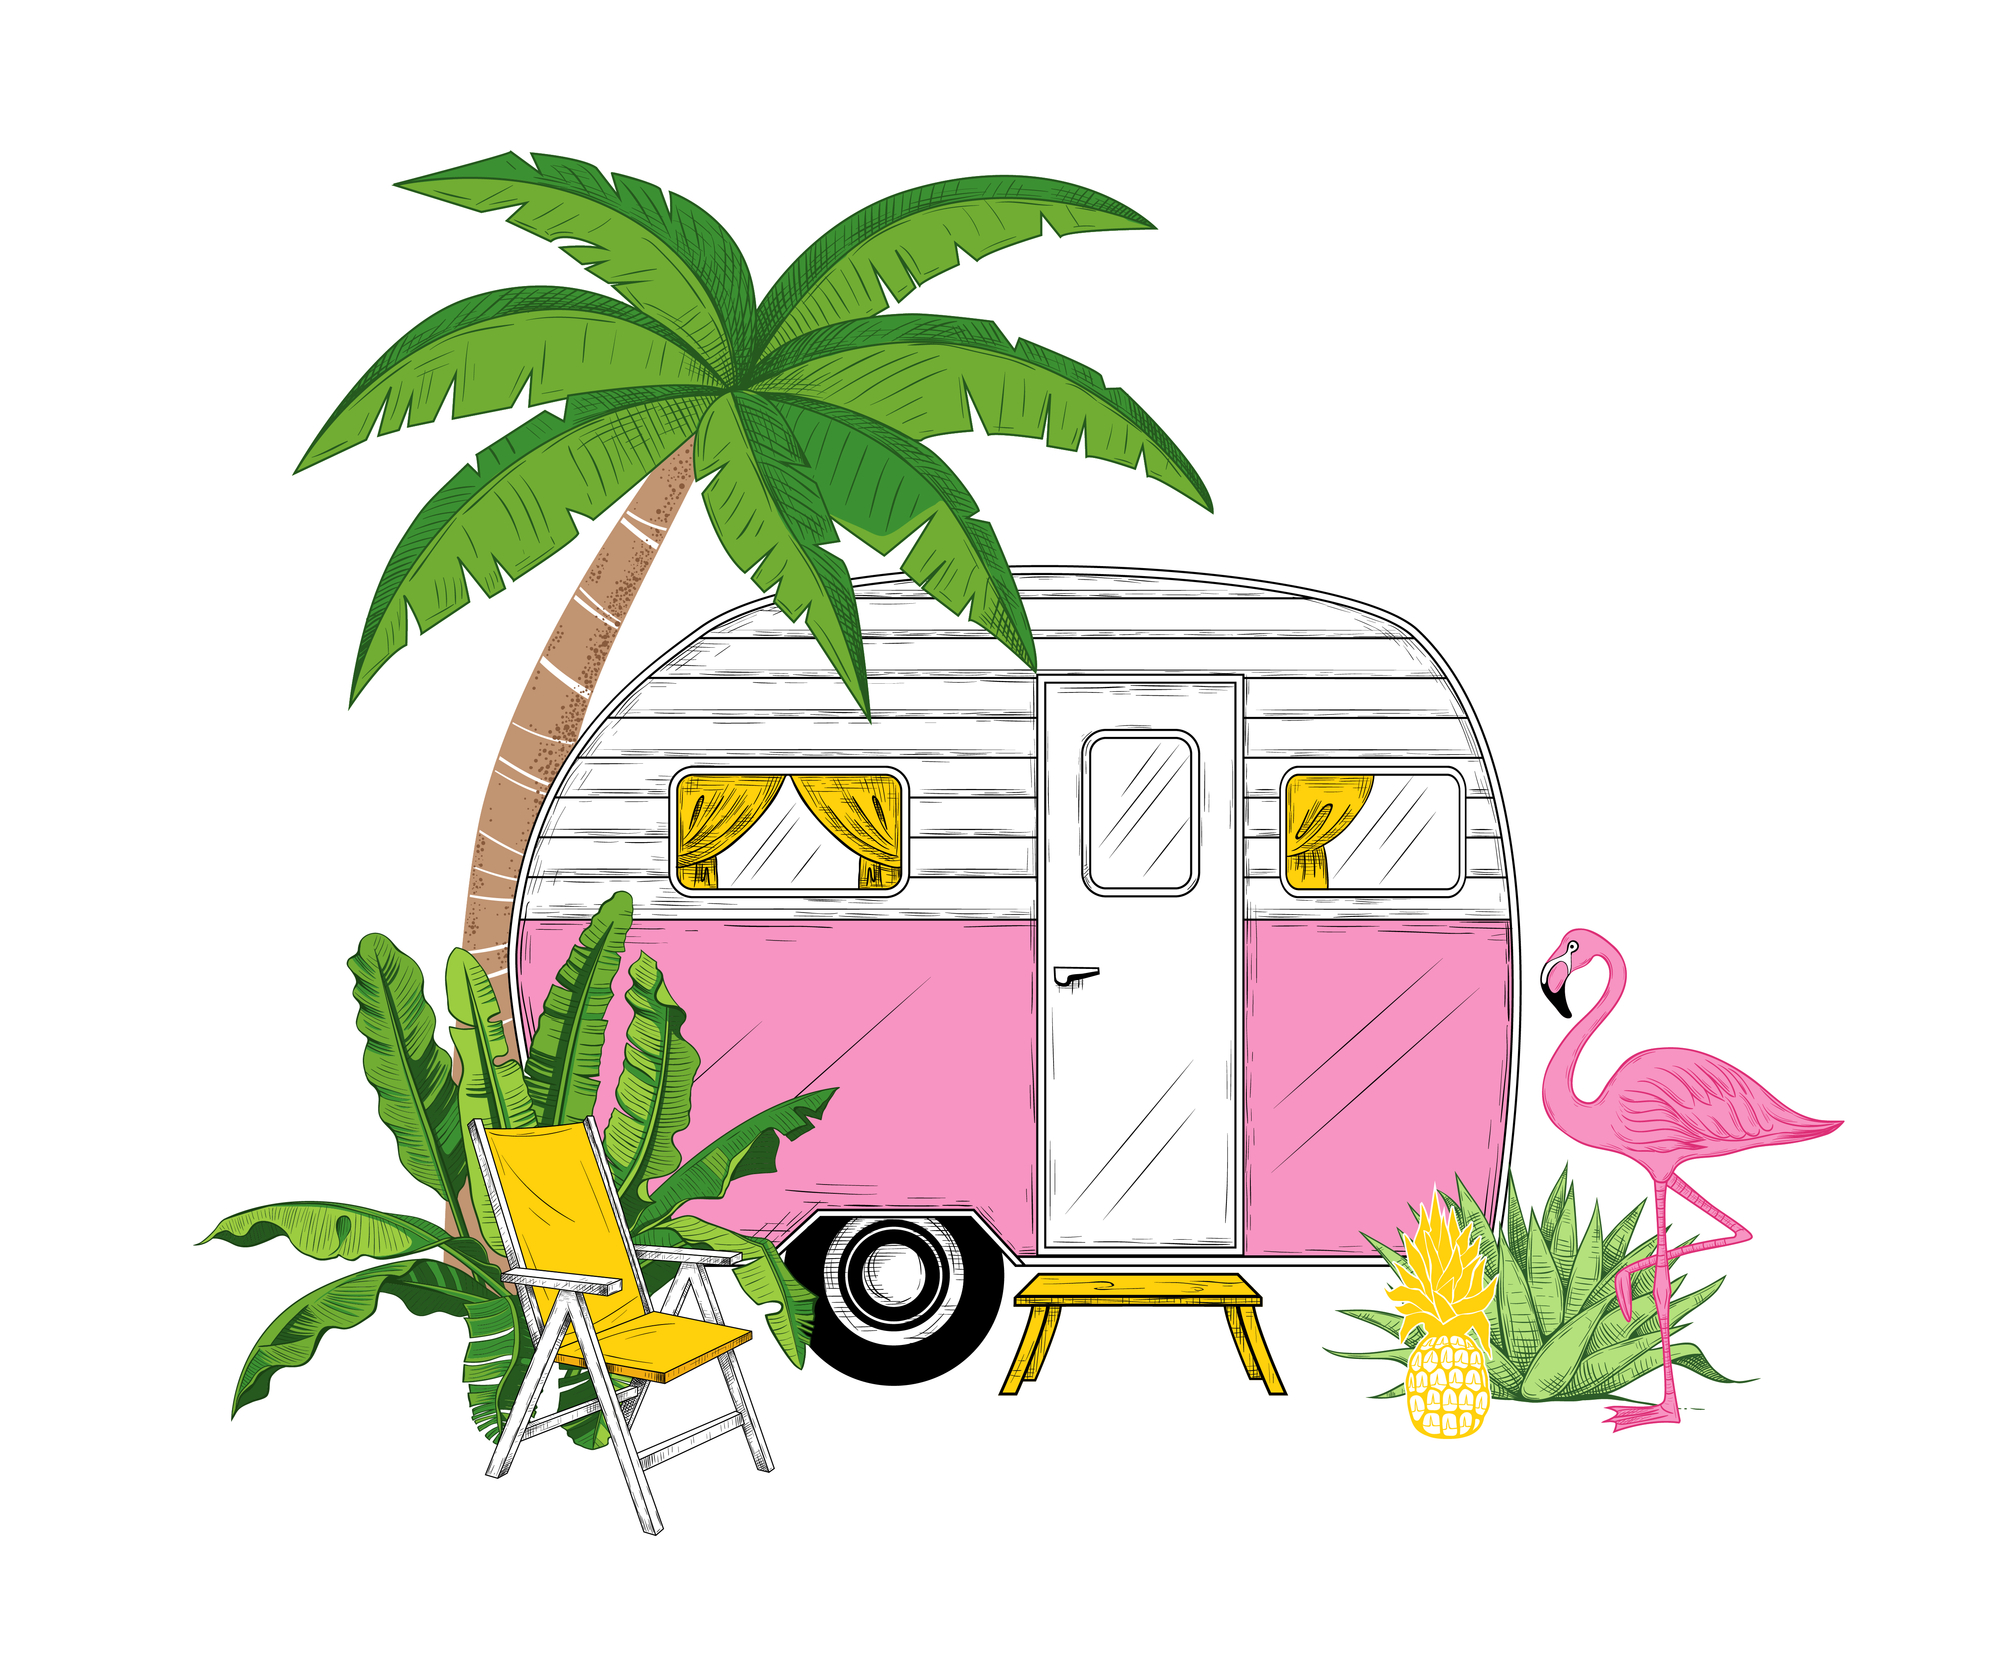 What Do Flamingos And Pineapples Mean In The RV Community?